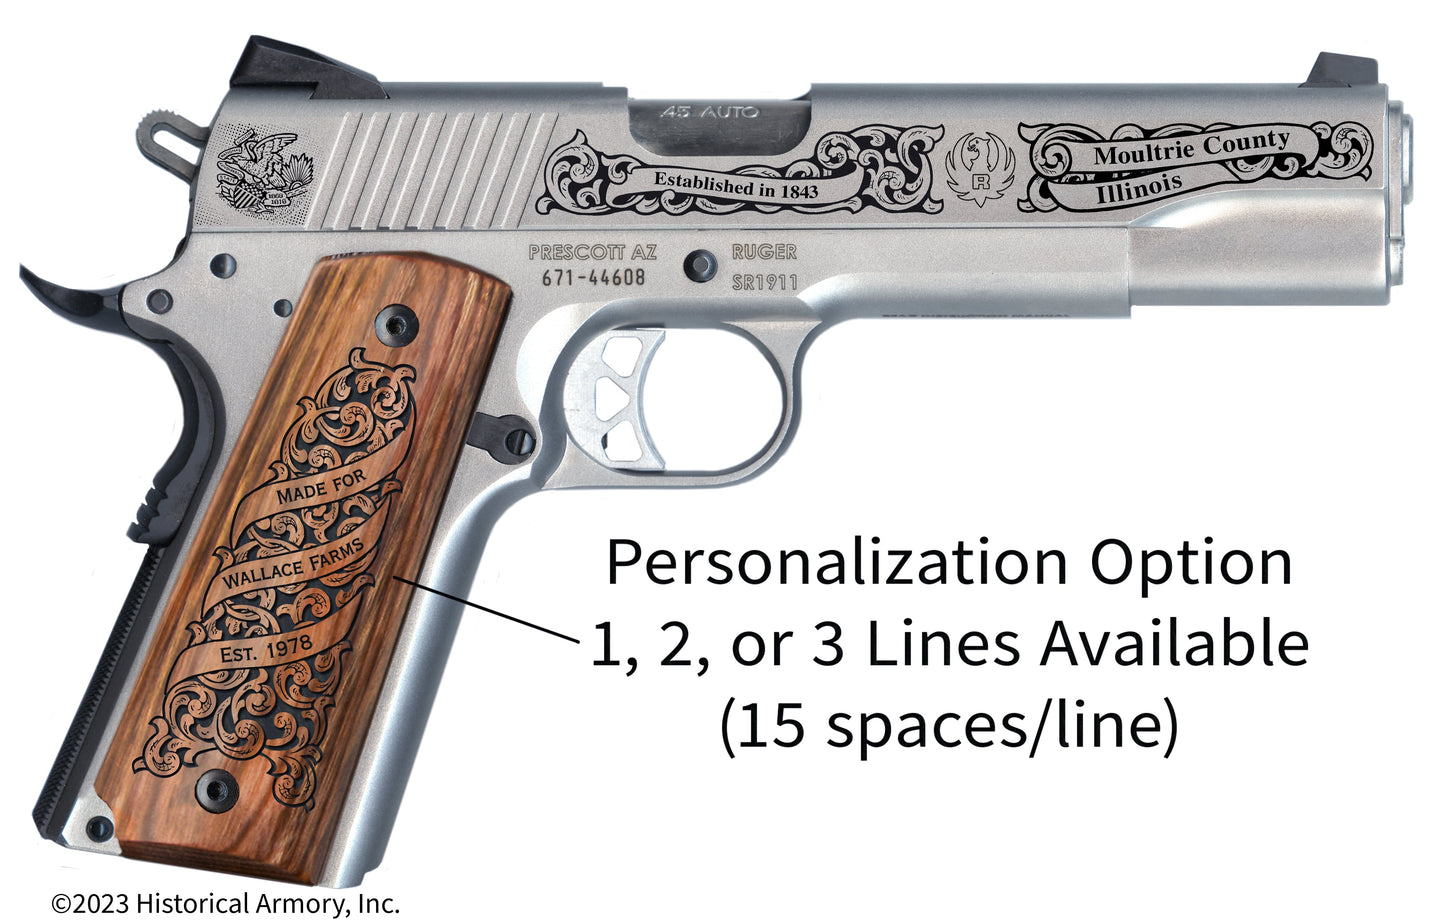 Moultrie County Illinois Personalized Engraved .45 Auto Ruger 1911